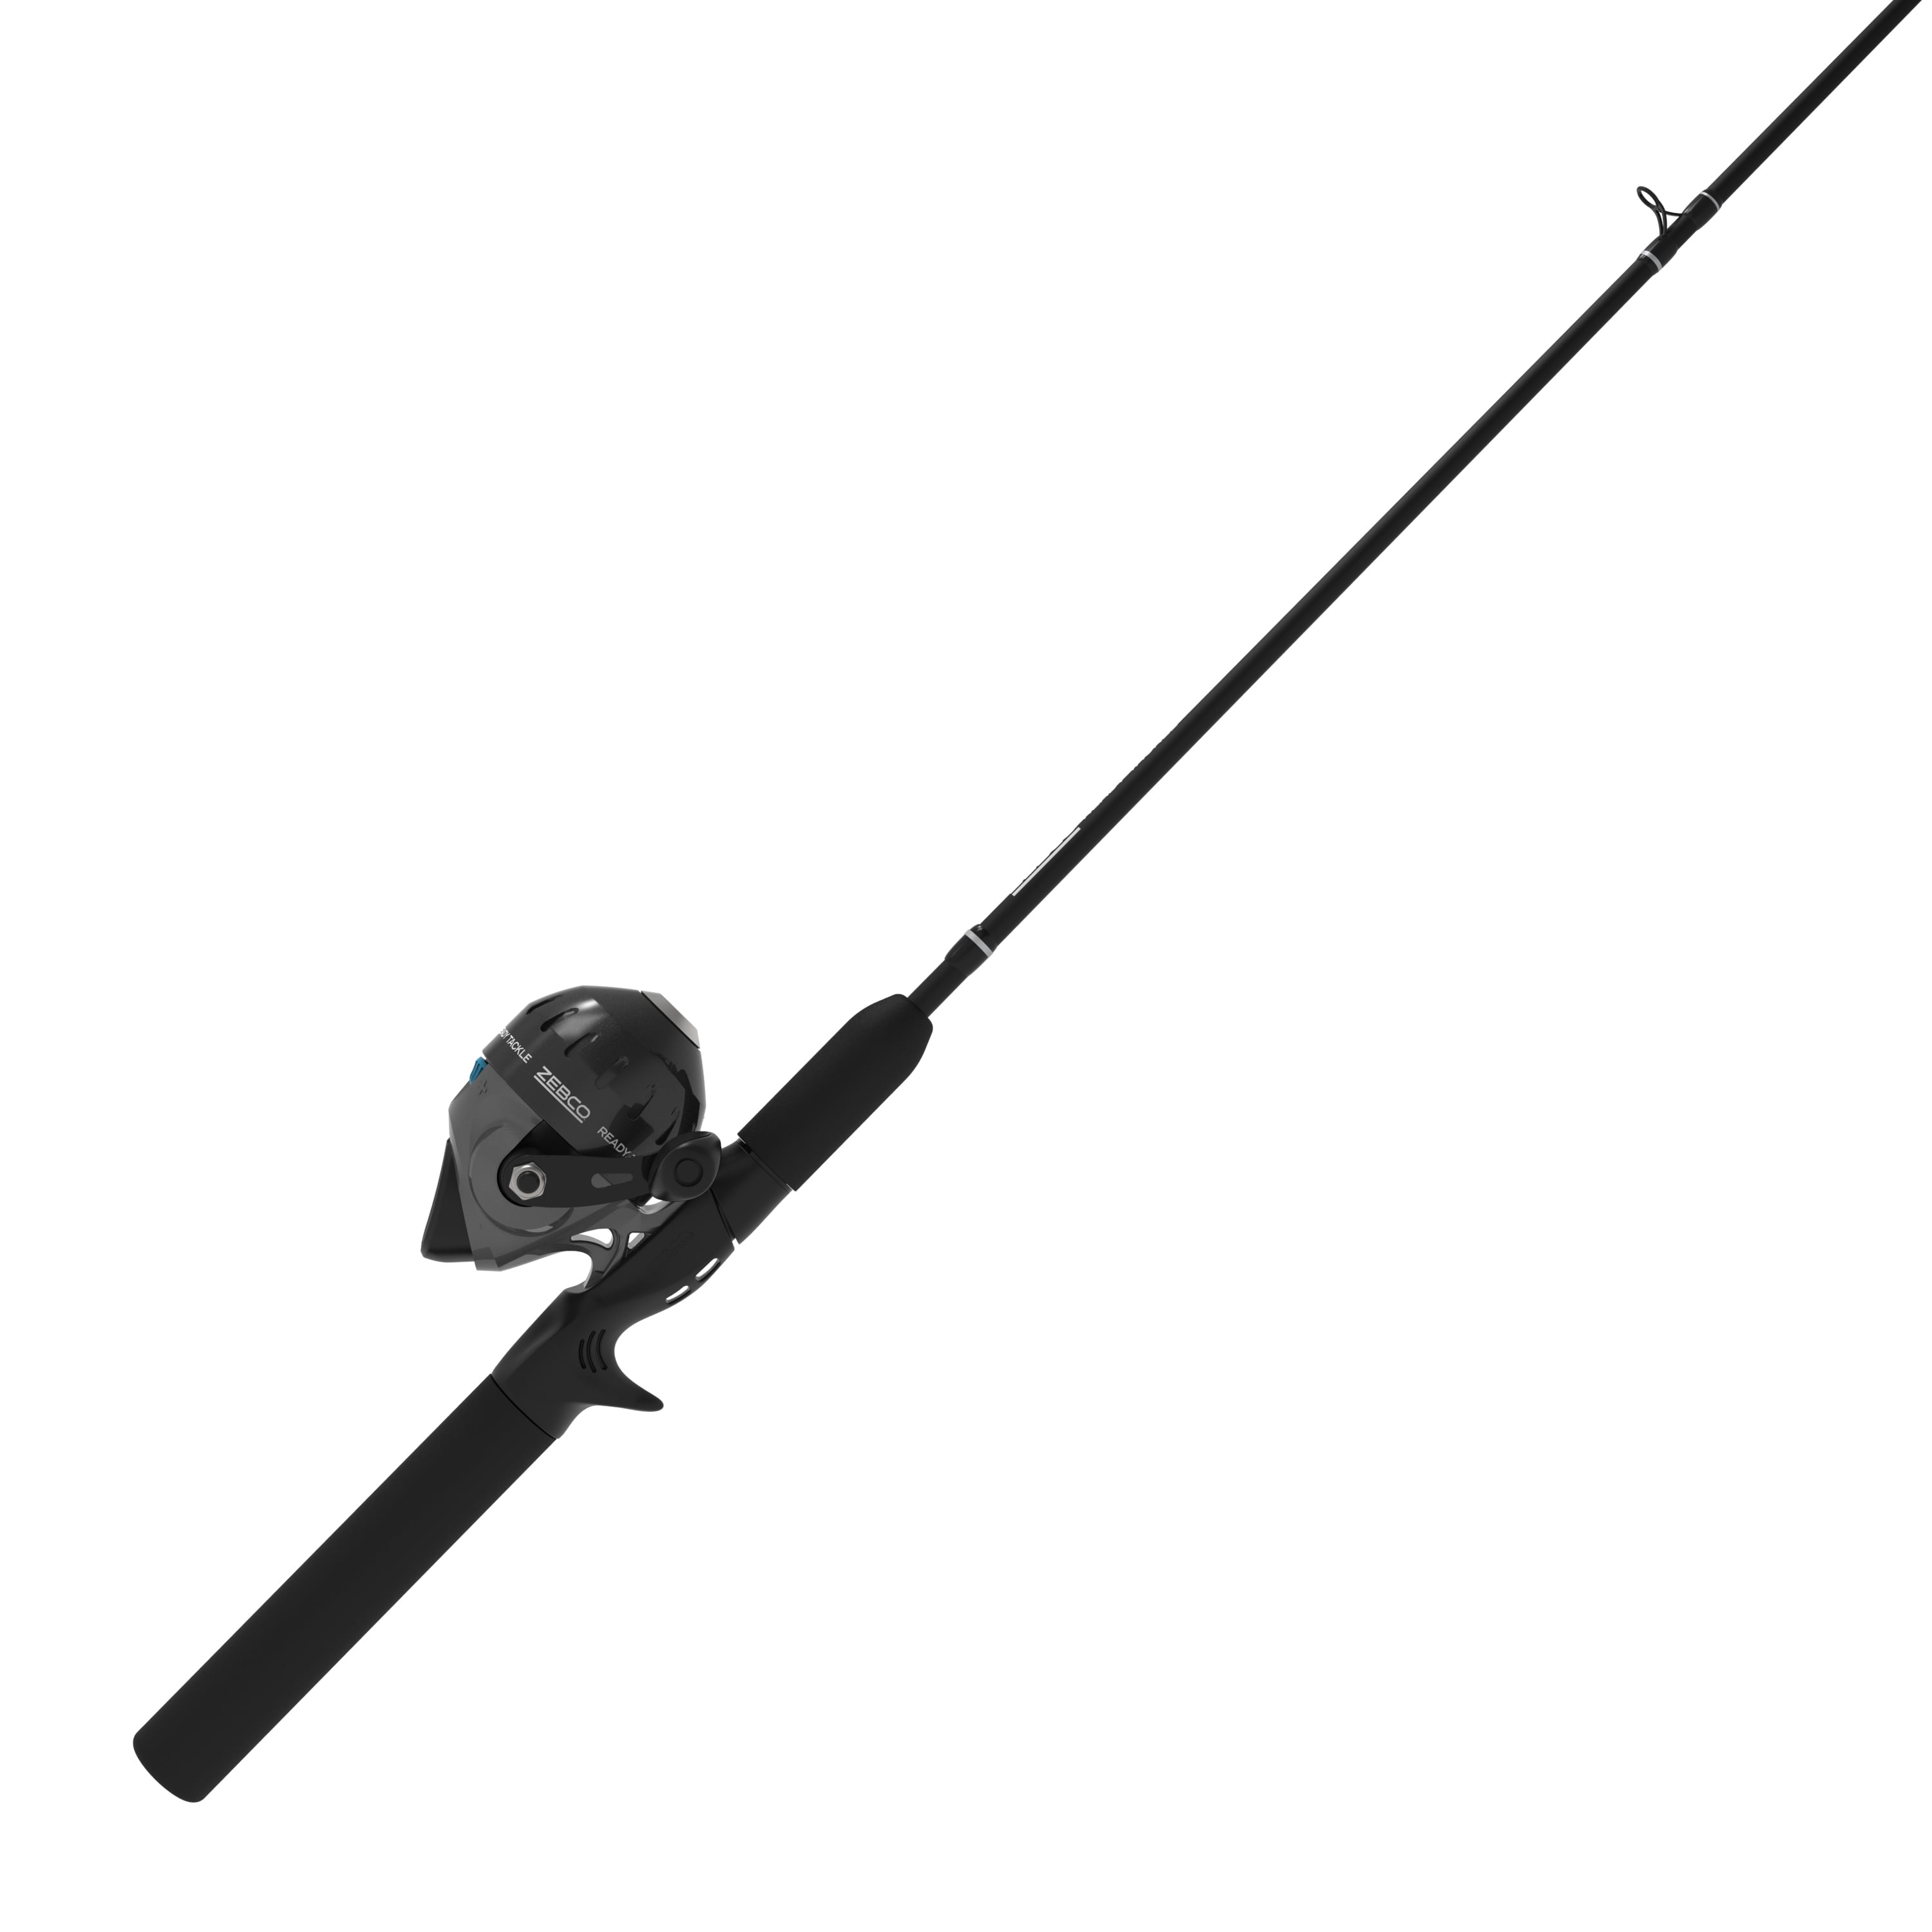 Zebco Ready Tackle Spincast Reel and Fishing Rod Combo, 5-Foot 6-Inch  2-Piece Fishing Pole, Size 30 Reel, Right-Hand Retrieve, Pre-spooled with  10-Pound Zebco Line, 45-Piece Tackle Kit, Black 